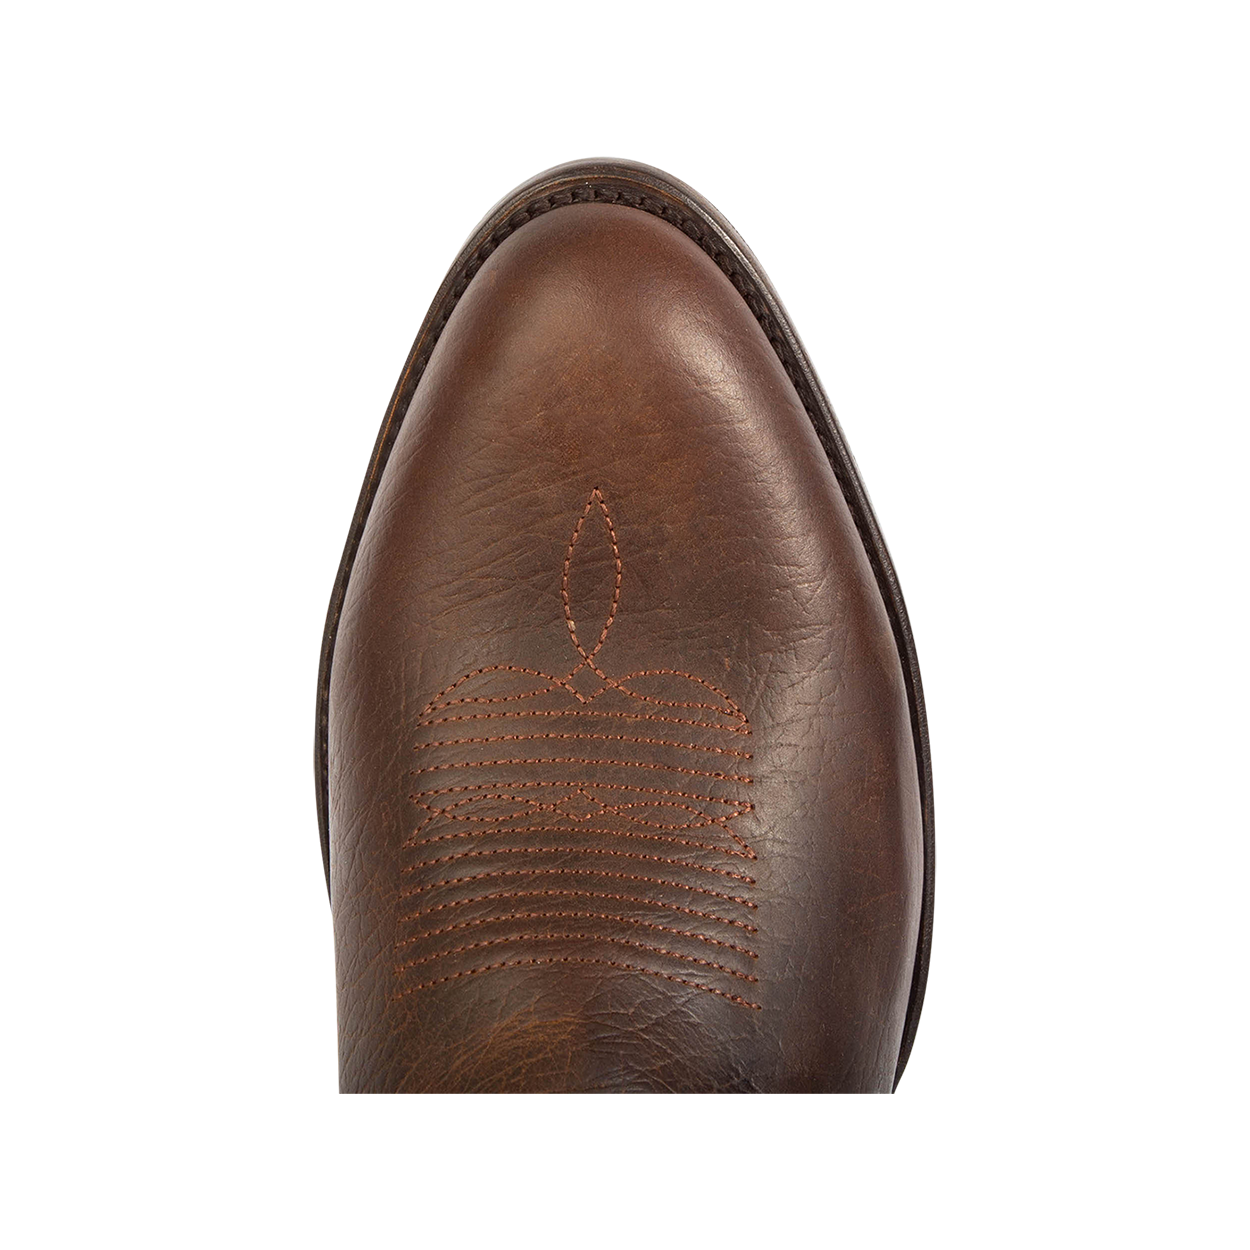 Top view showing traditional toe shape and stitch detailing on FREEBIRD men's Bandito brown leather boot